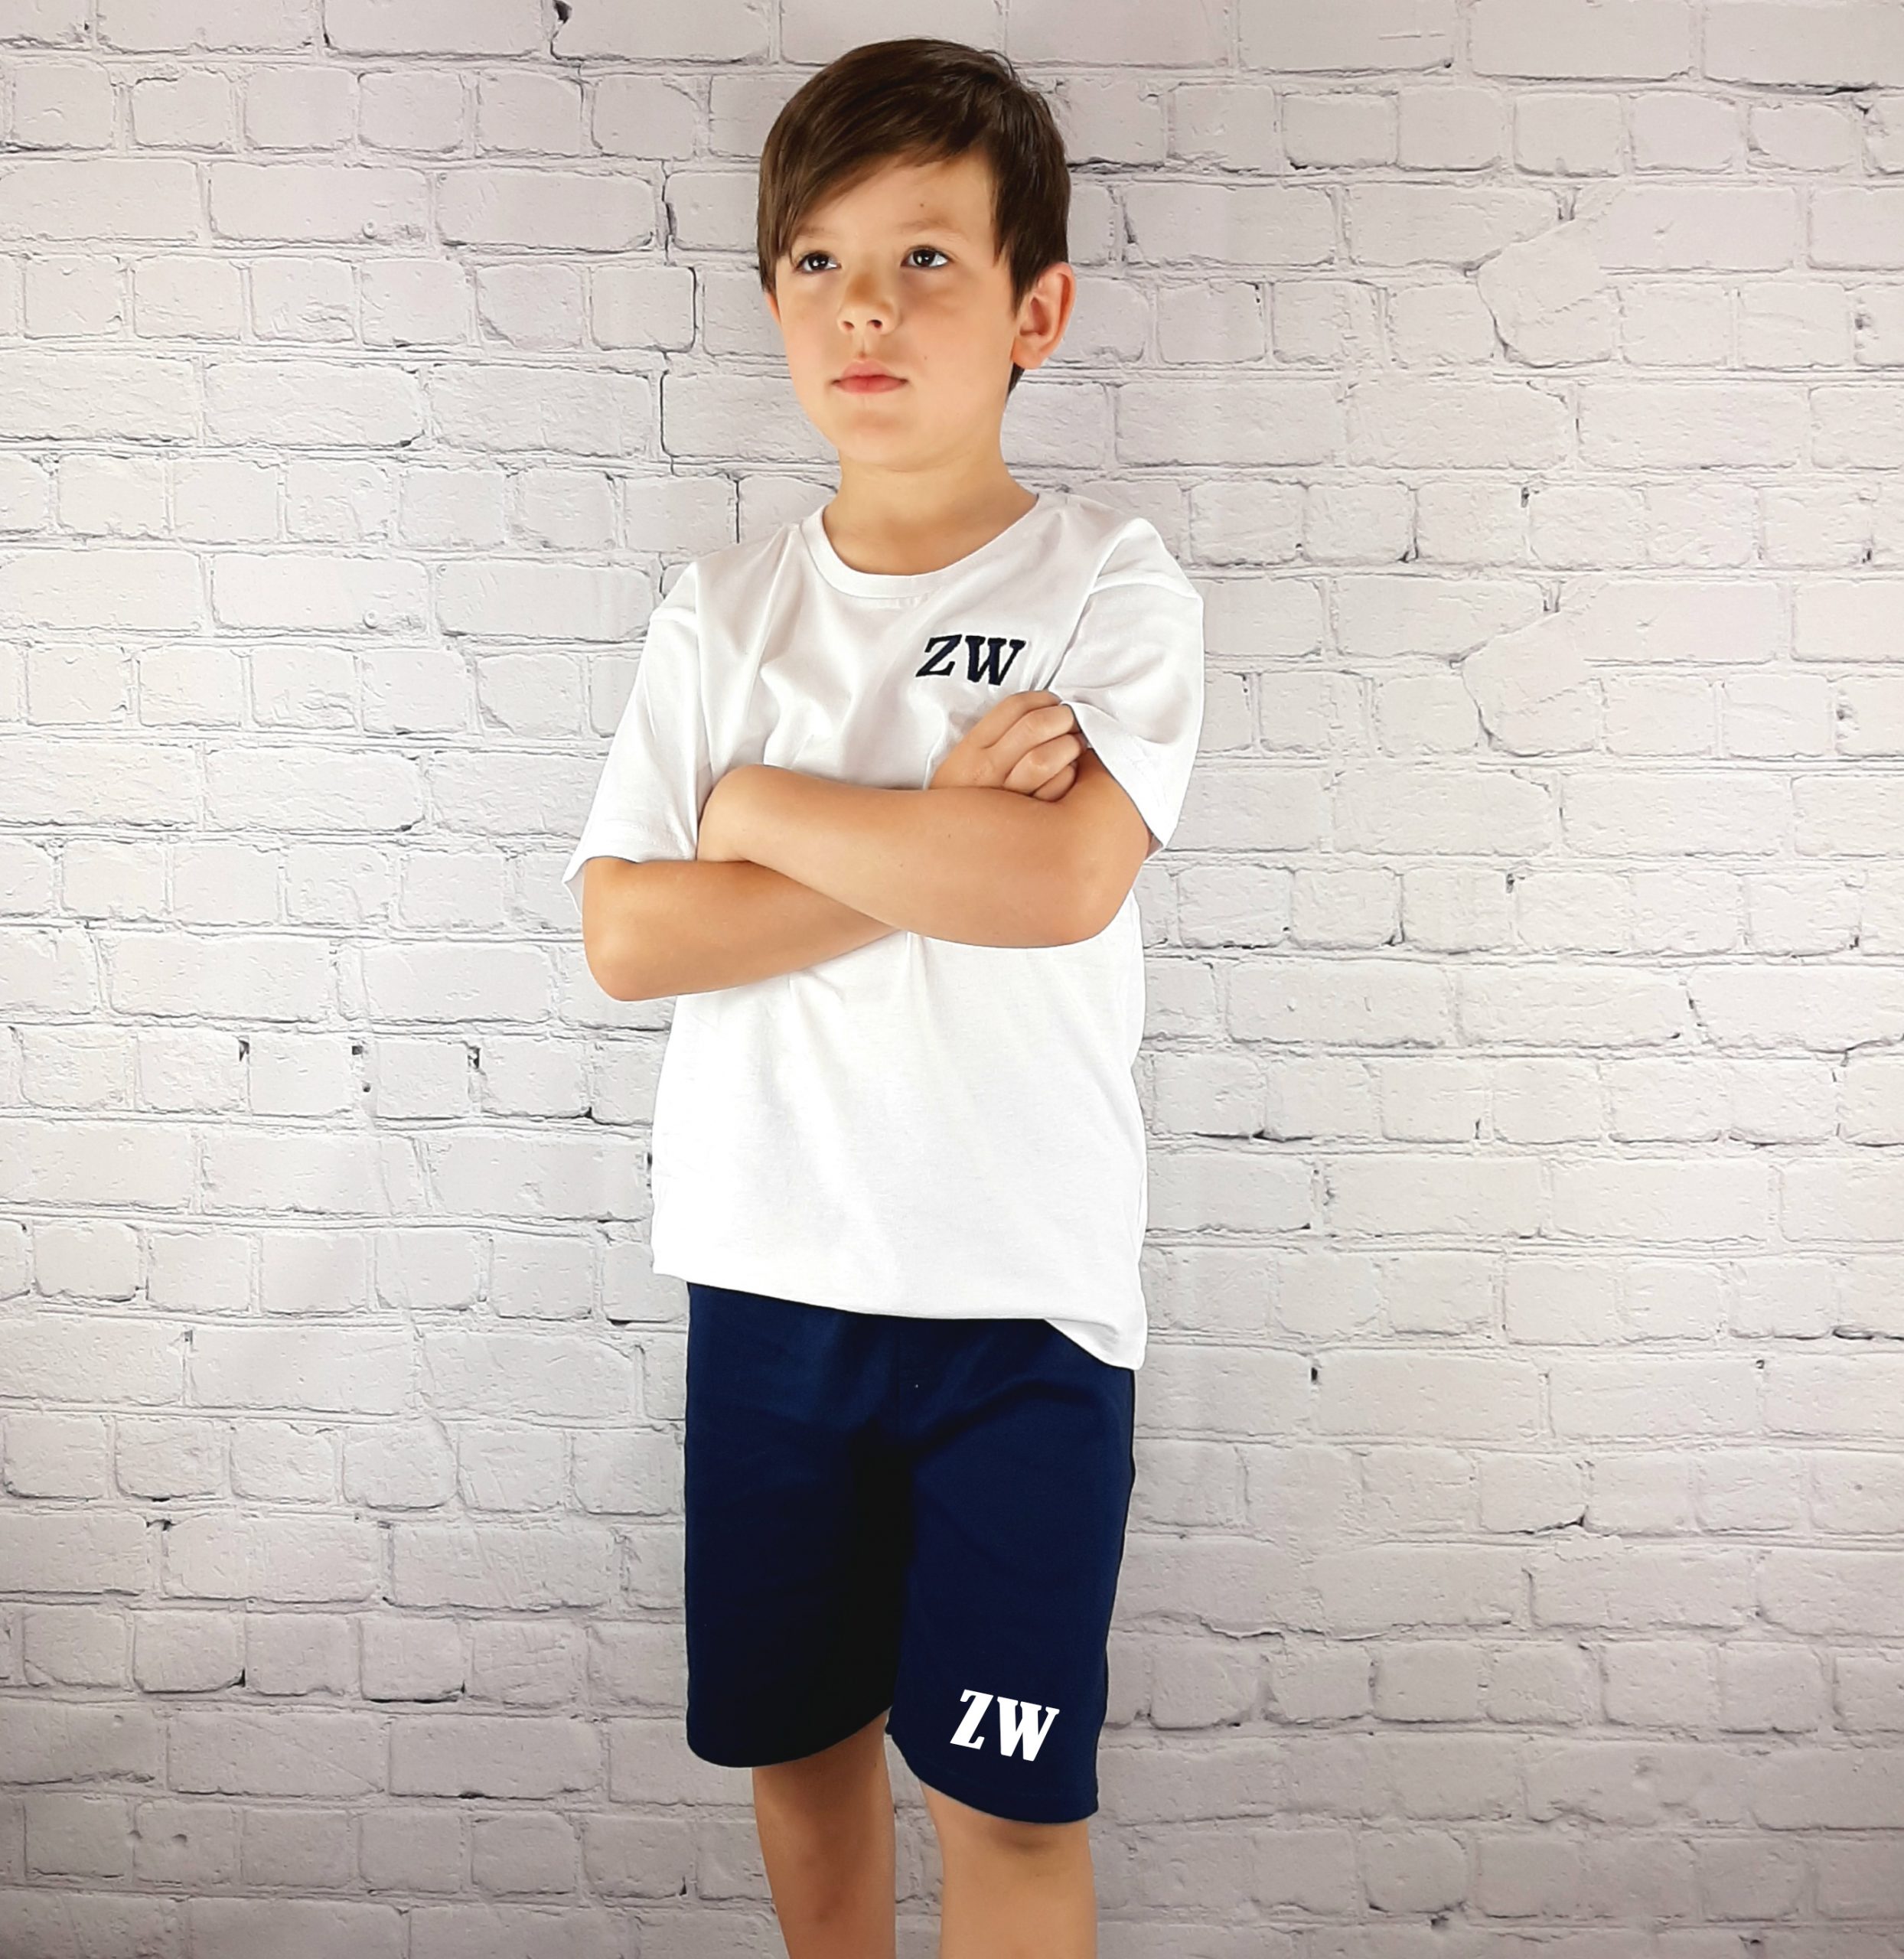 shorts and t shirt childrens navy shorts with white embroidered personalisation Children's Cotton Shorts